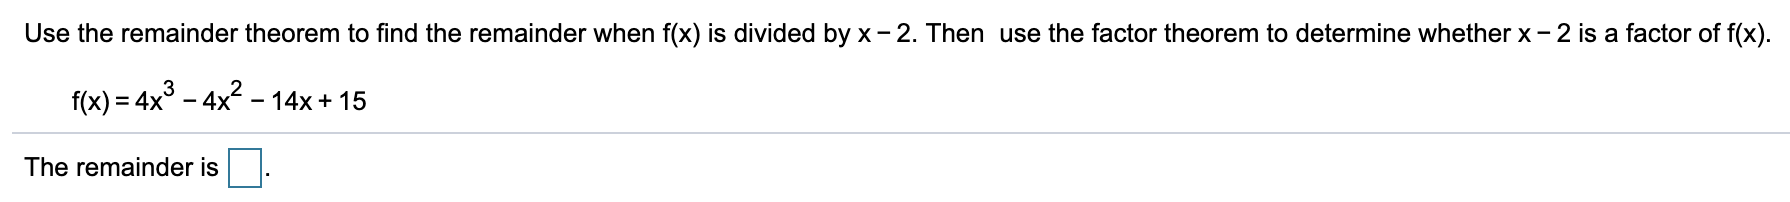 Use the remainder theorem to find the remainder when f(x) is divided by x- 2. Then use the factor theorem to determine whether x - 2 is a factor of f(x).
f(x) = 4x° – 4x2 - 14x + 15
The remainder is
